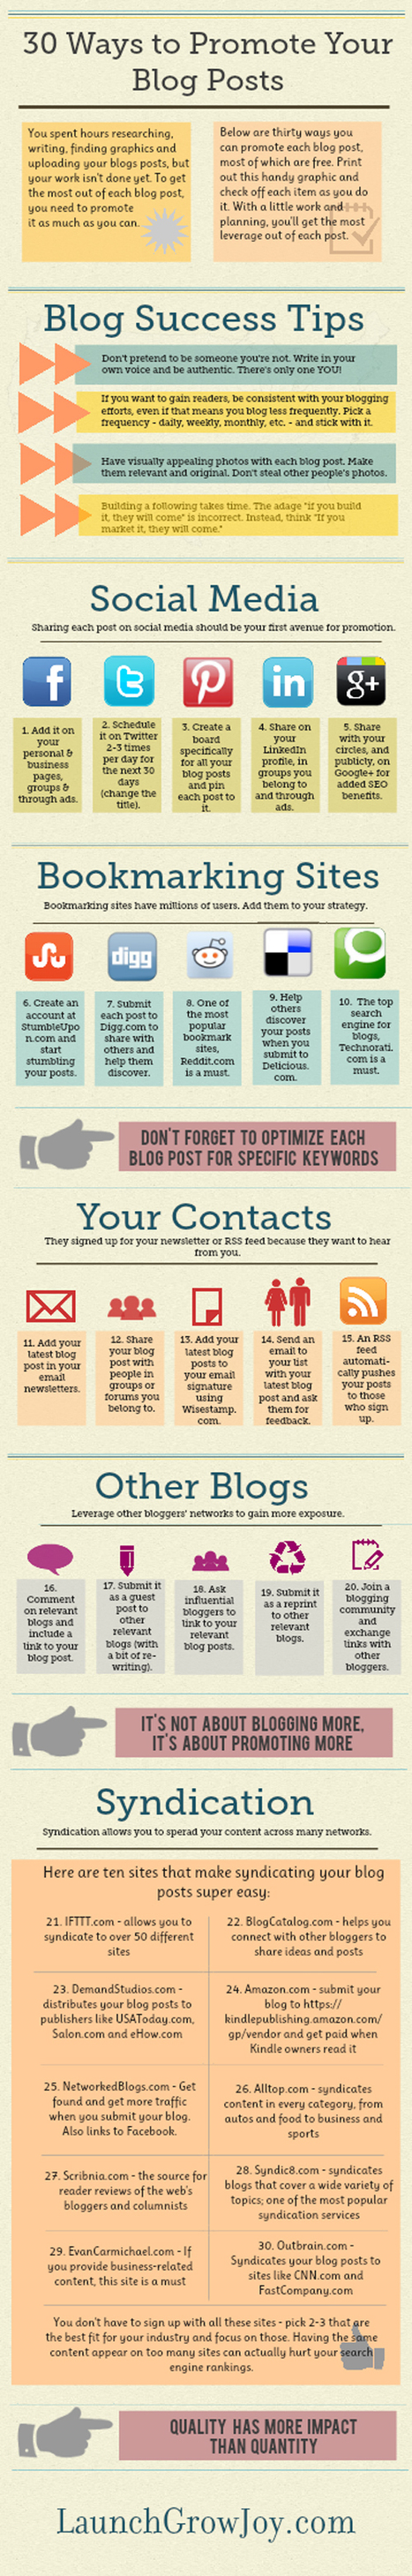 30 ways to promote your blog posts and to drive more traffic to your blog – infographic | EcritureS - WritingZ | Scoop.it